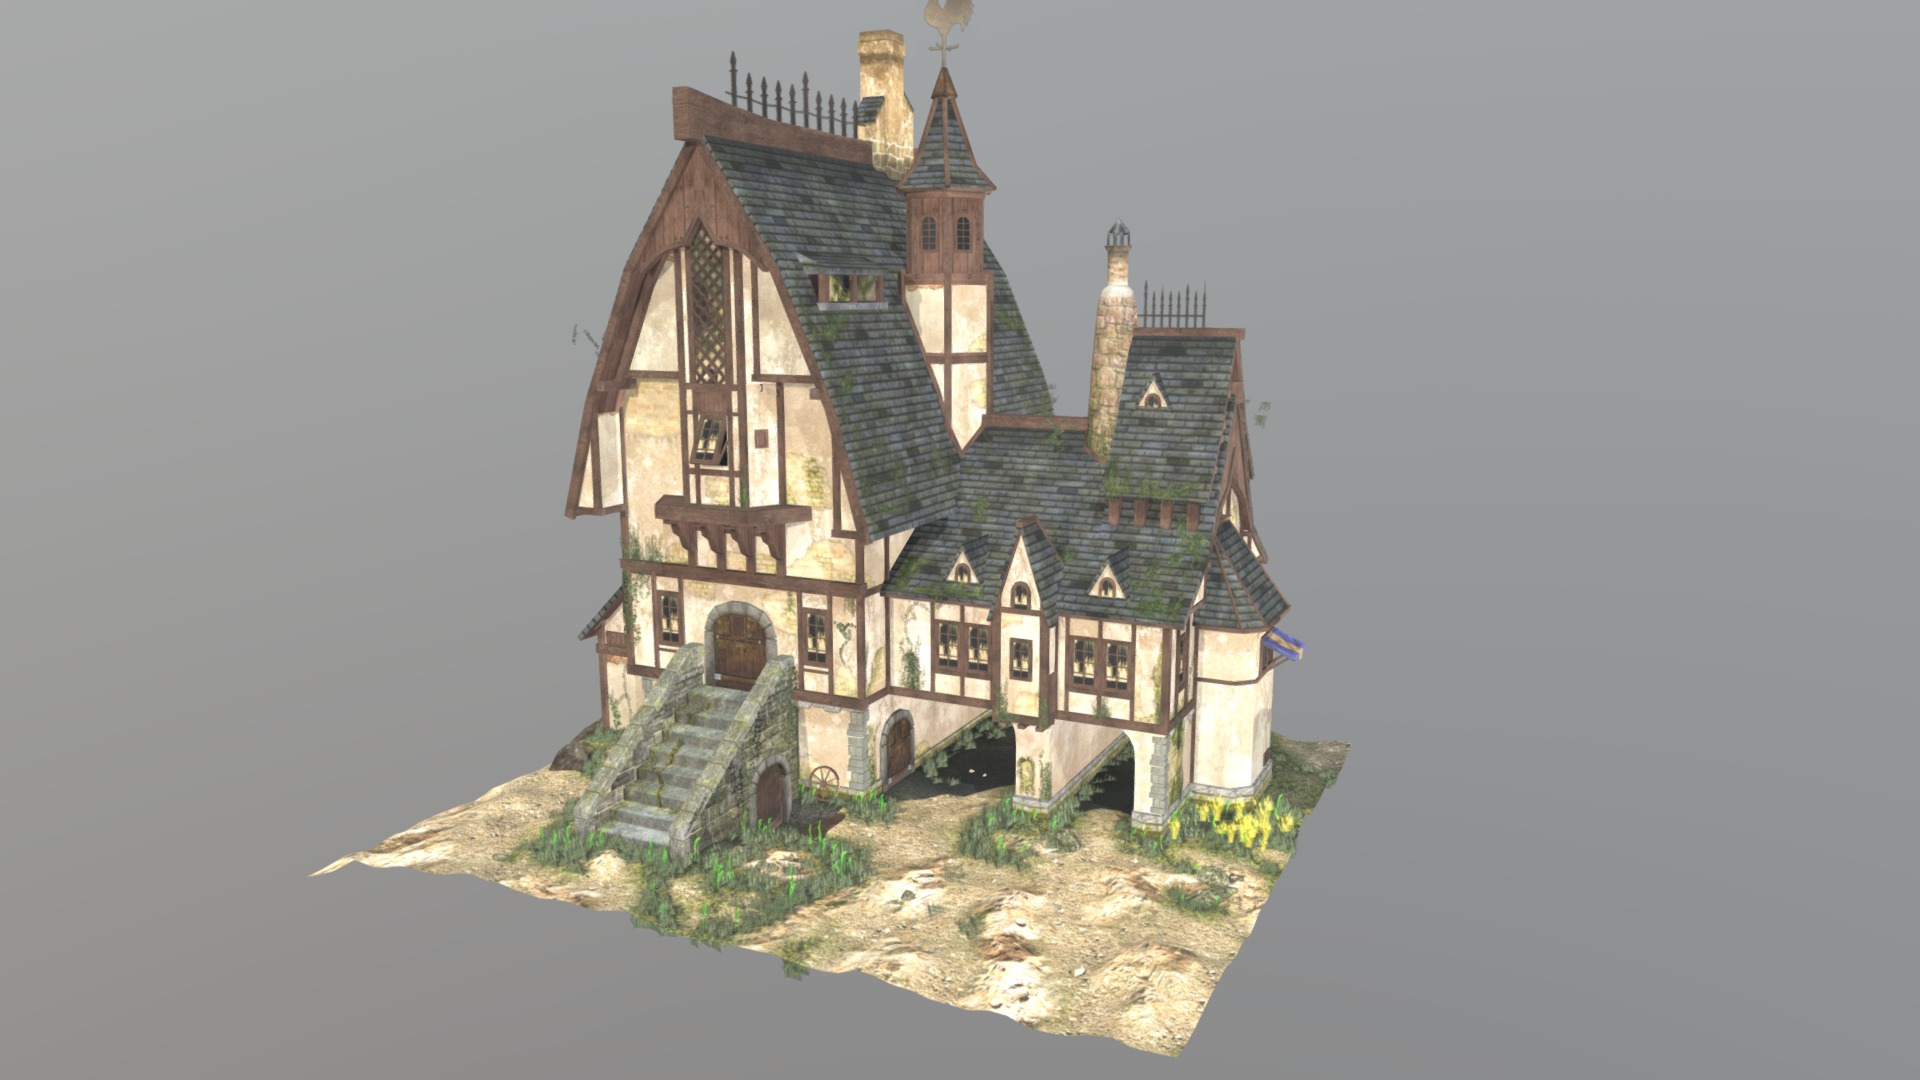 3D model 1234 - This is a 3D model of the 1234. The 3D model is about a castle on a hill.